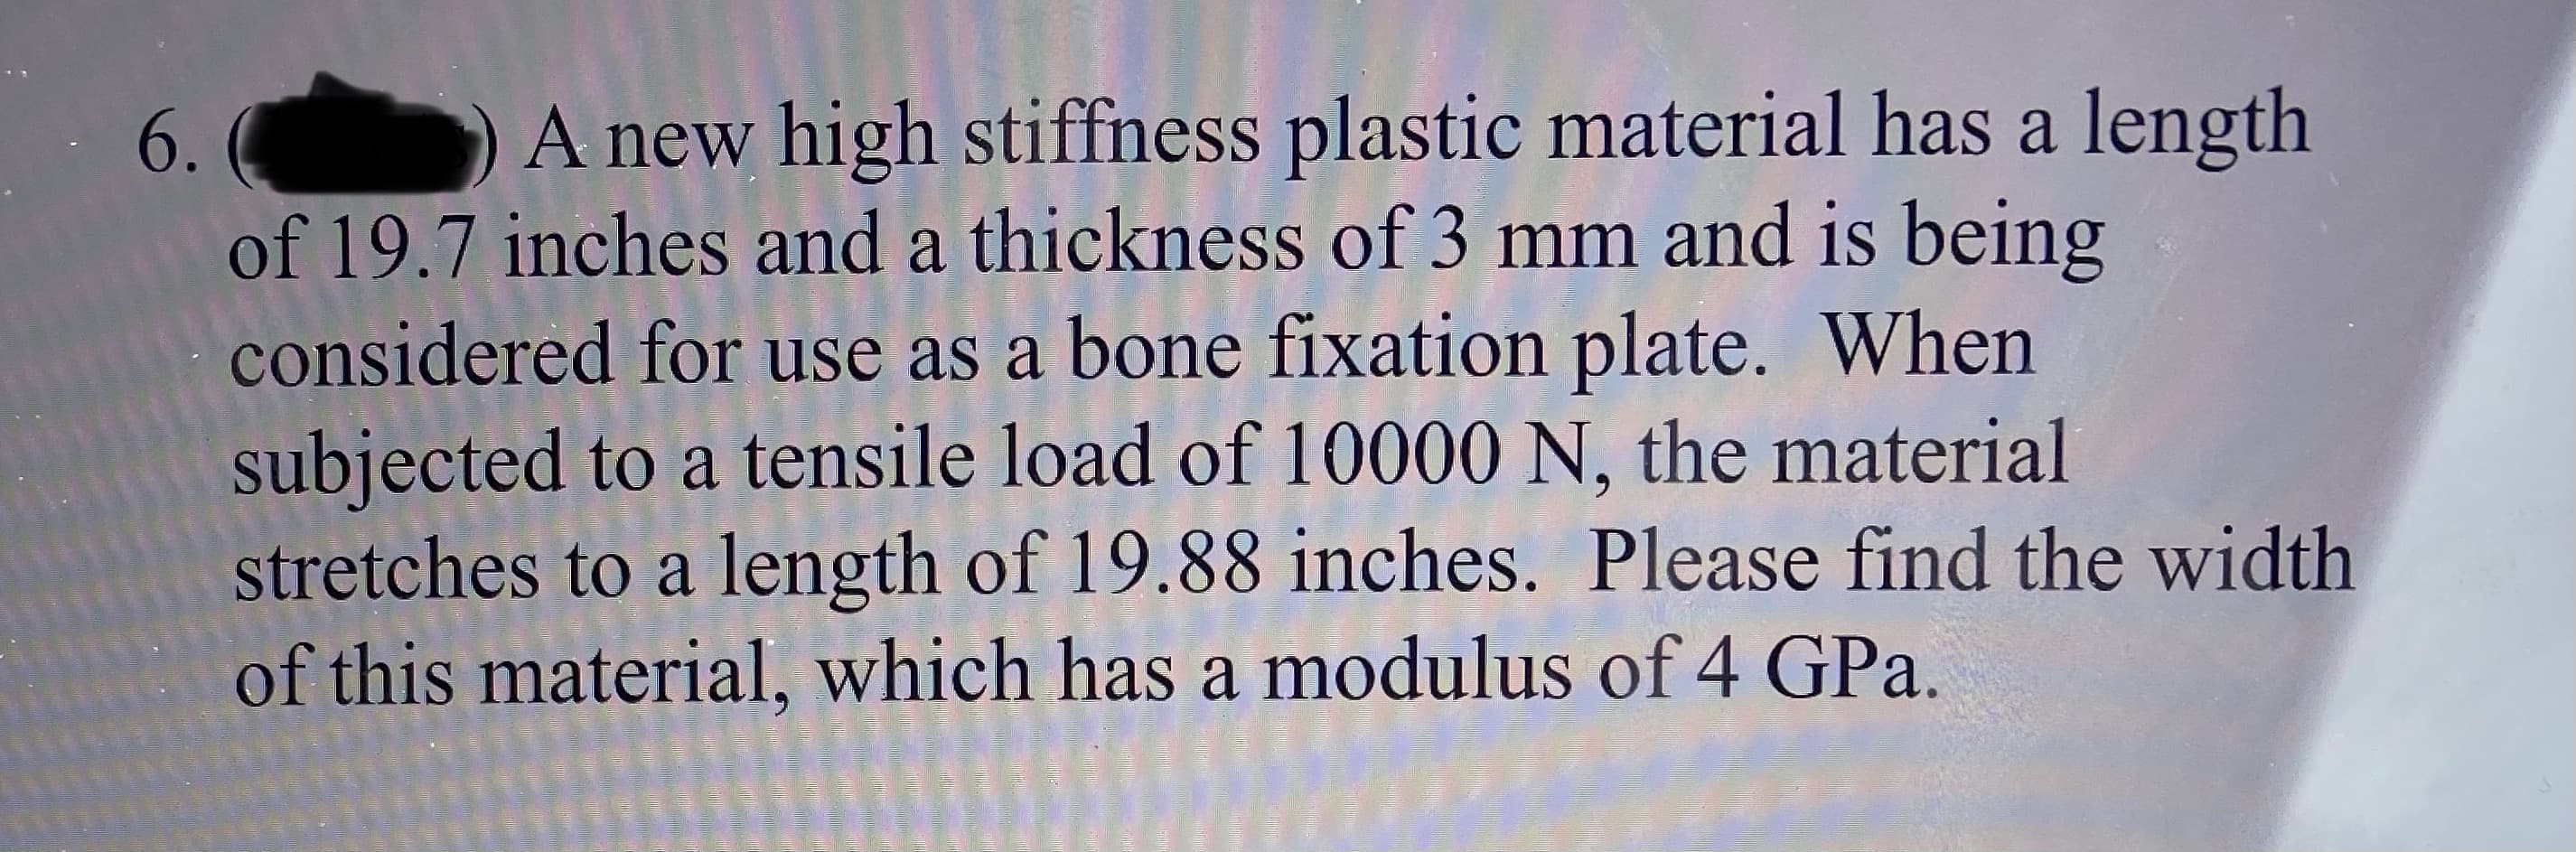 A new high stiffness plastic material has a length
of 19.7 inches and a thickness of 3 mm and is being
considered for use as a bone fixation plate. When
subjected to a tensile load of 10000 N, the material
stretches to a length of 19.88 inches. Please find the width
of this material, which has a modulus of 4 GPa.
